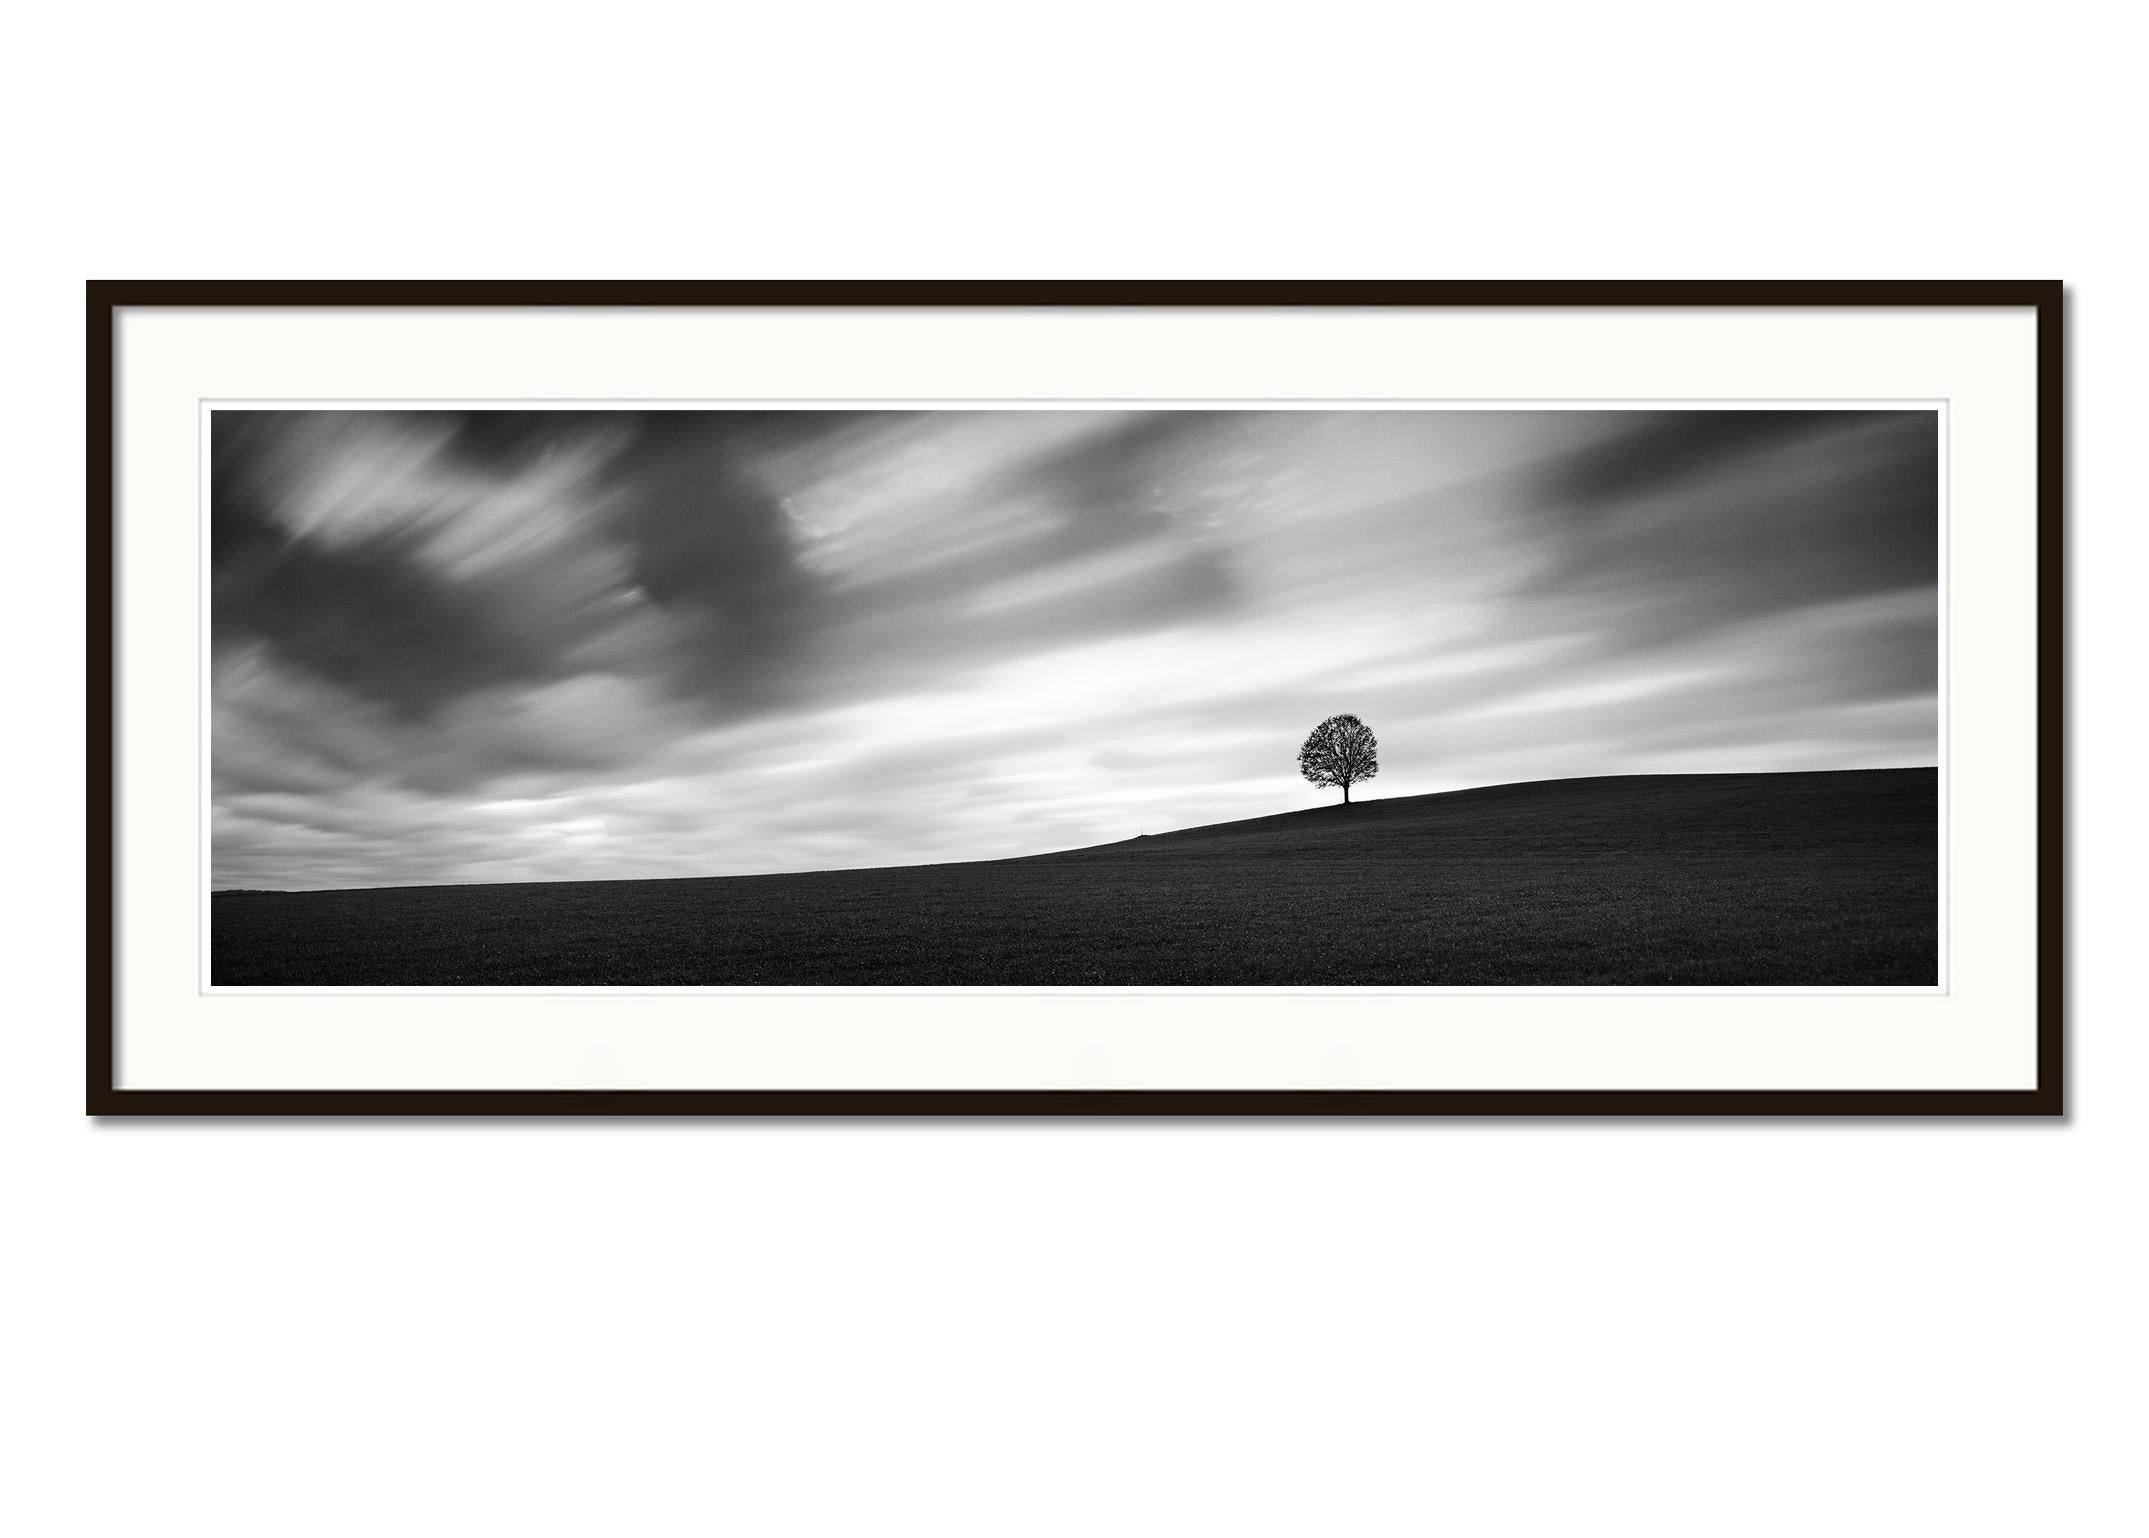 Turbulent Times, Single Tree, Storm, Long Exposure, black and white photography - Black Black and White Photograph by Gerald Berghammer